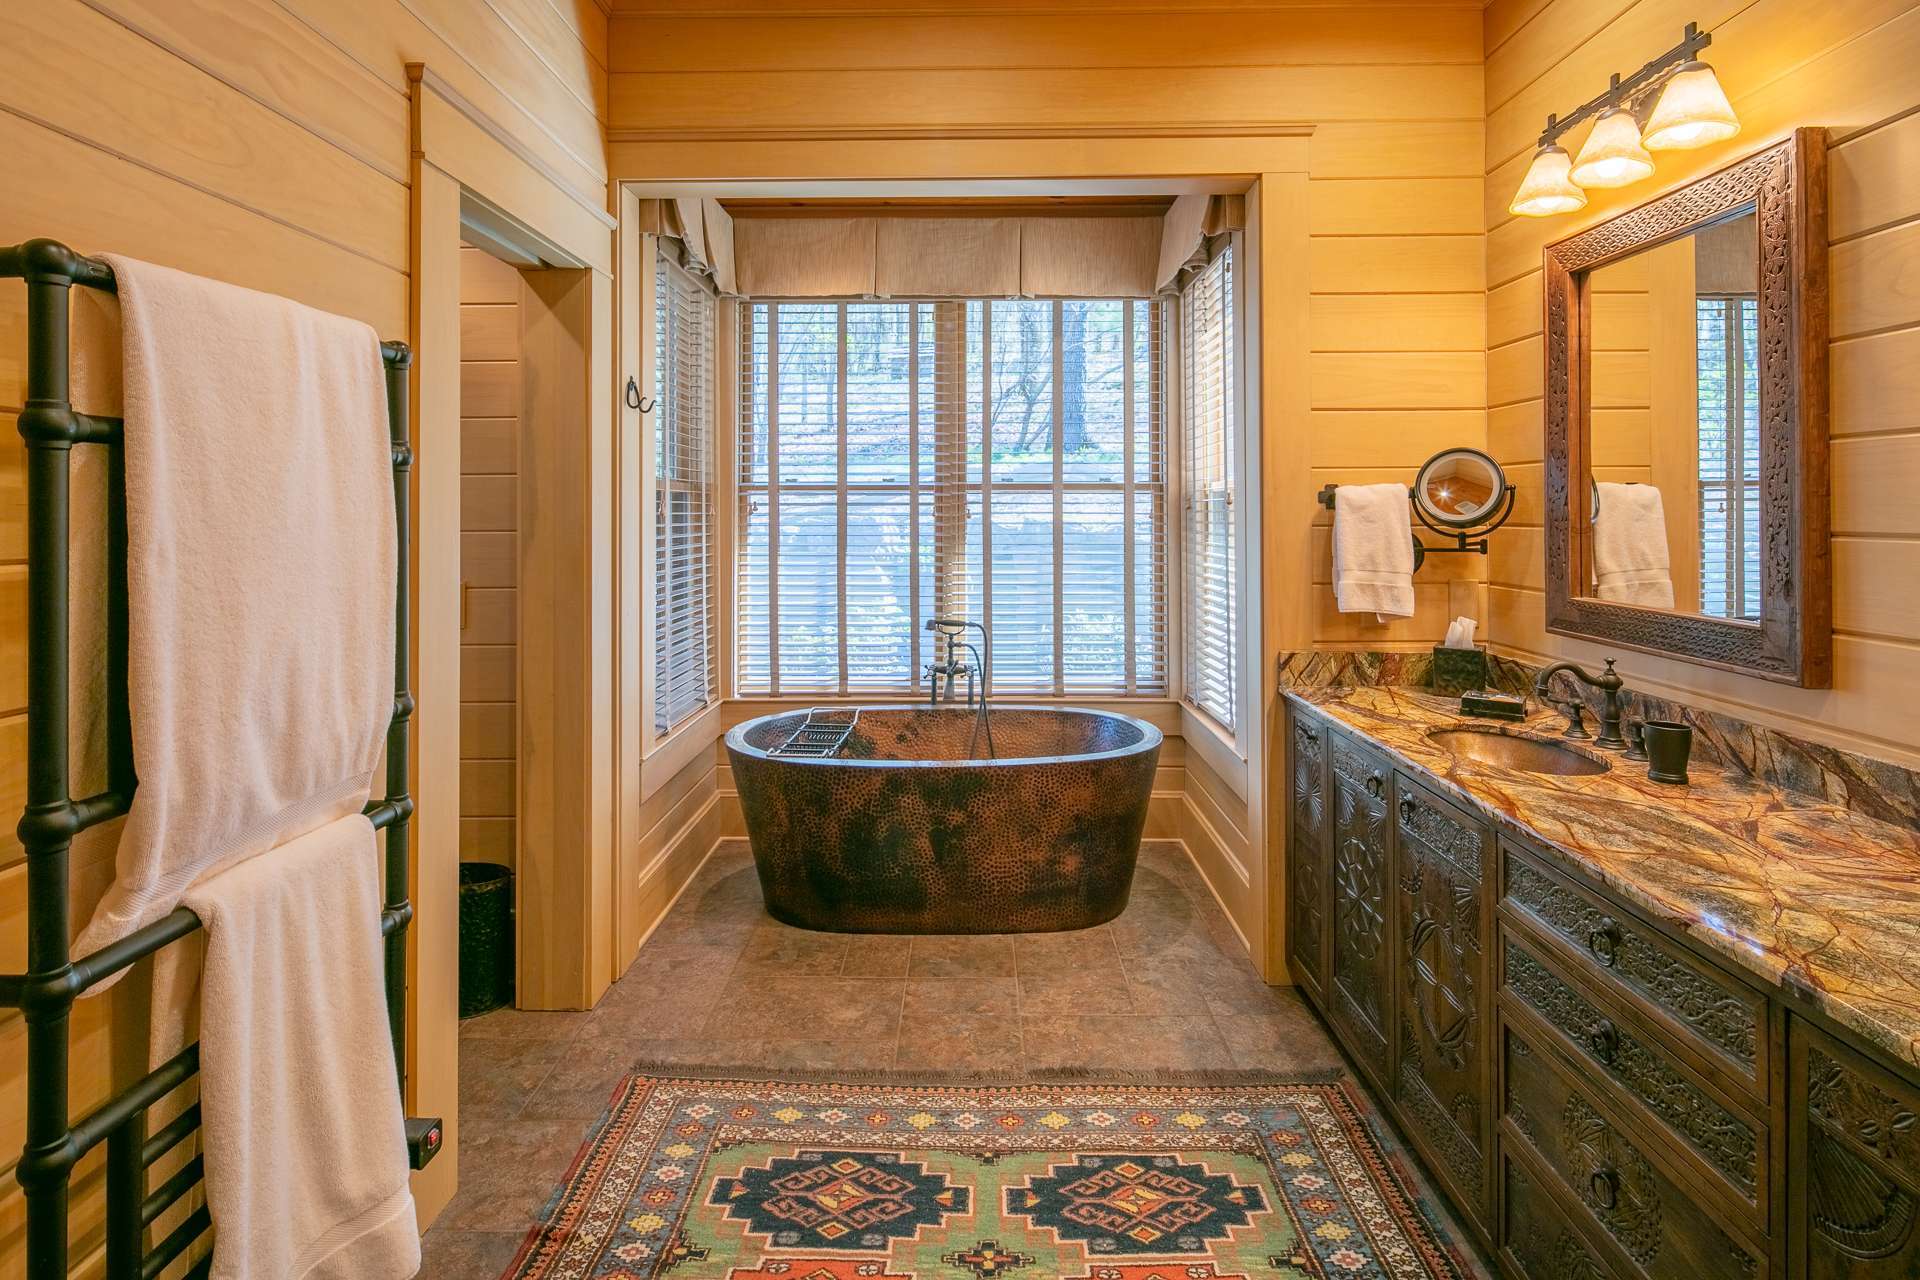 The luxurious master bath features unique carved cabinetry, hammered copper soaking tub and sinks, steam shower with six jets, heated floor and towel rack.